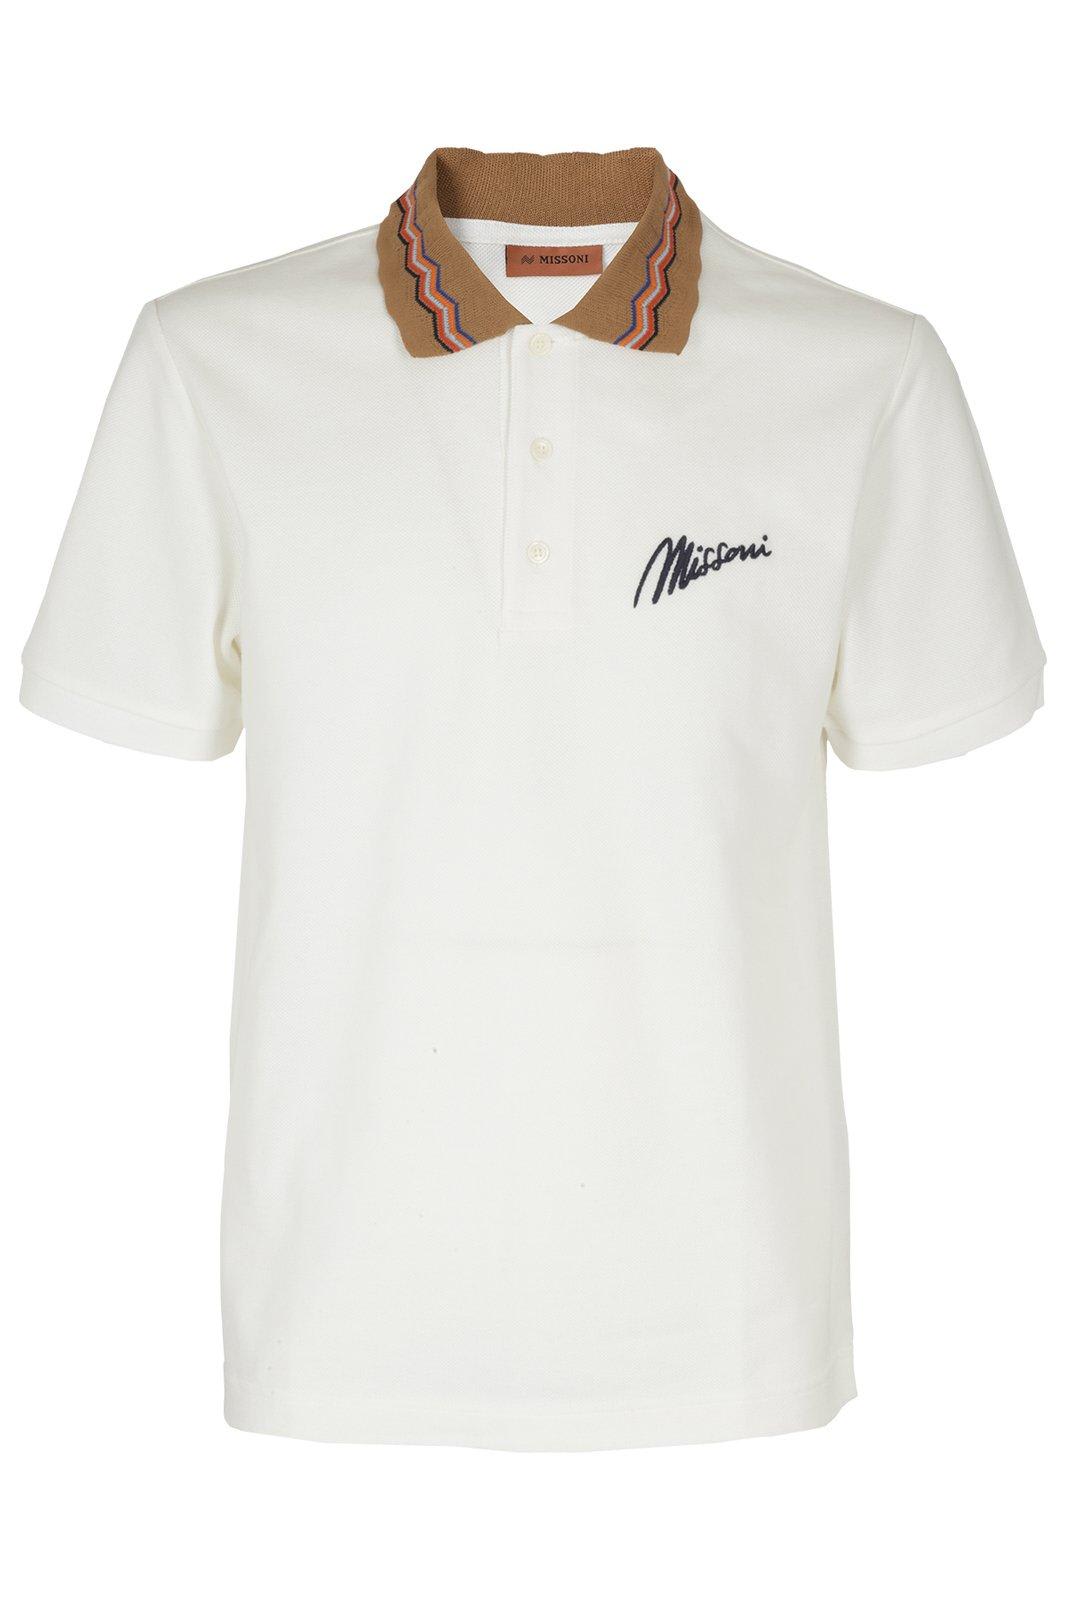 Missoni Logo Embroidered Short-sleeved Polo Shirt